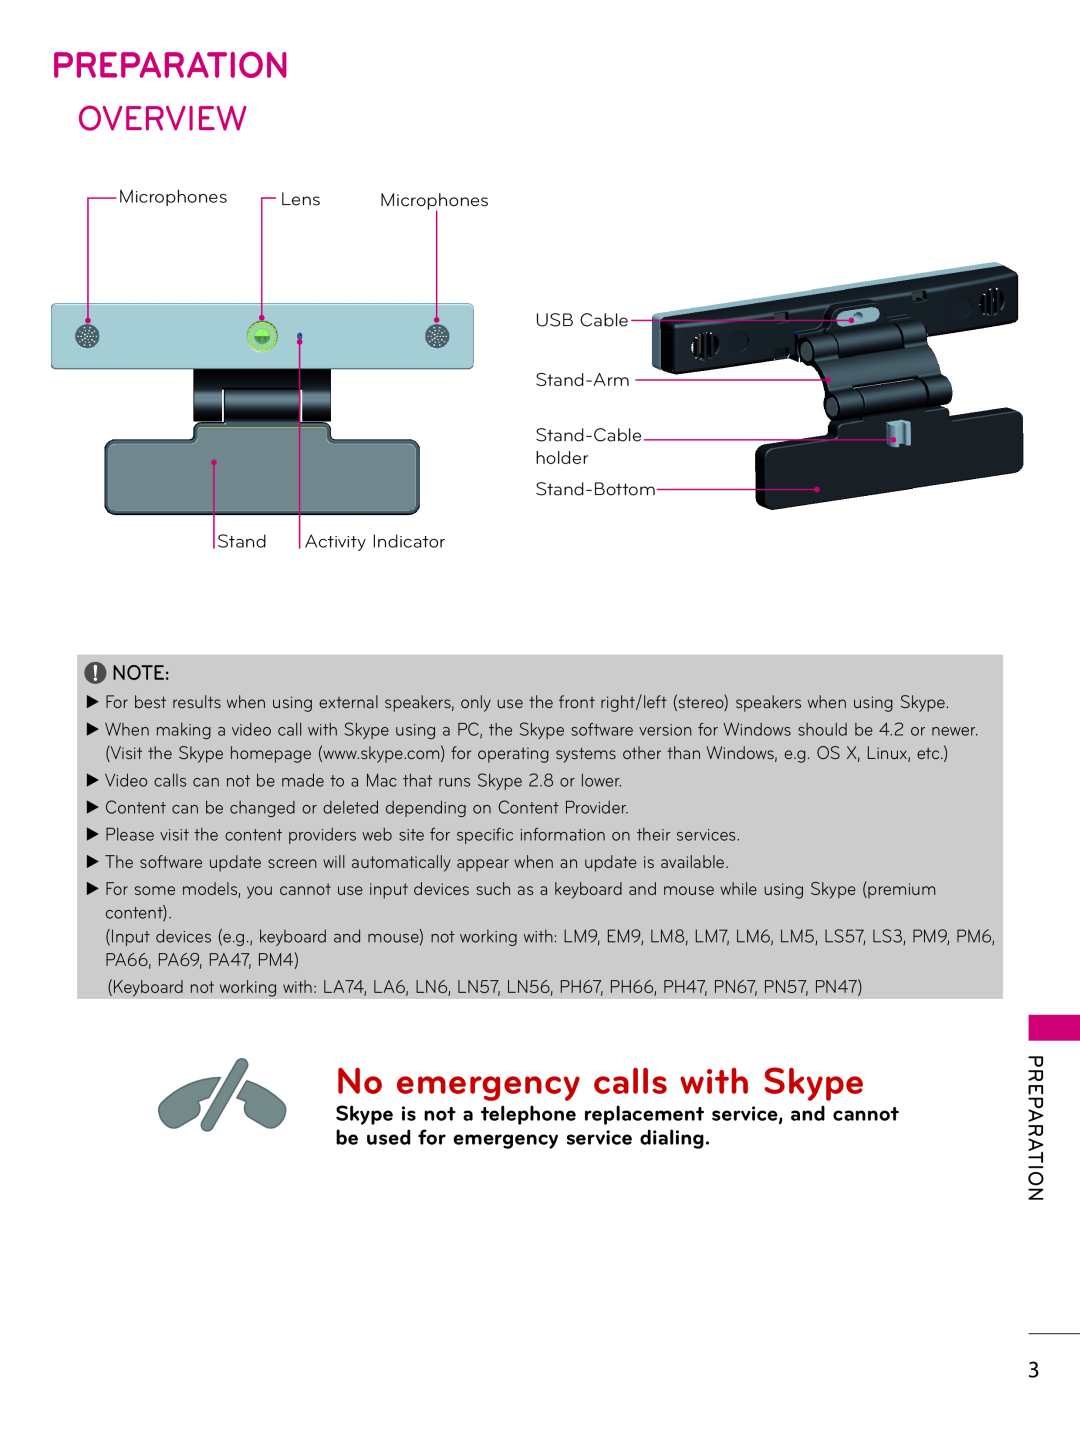 LG Electronics AN-VC400 owner manual Preparation, Overview, No emergency calls with Skype 